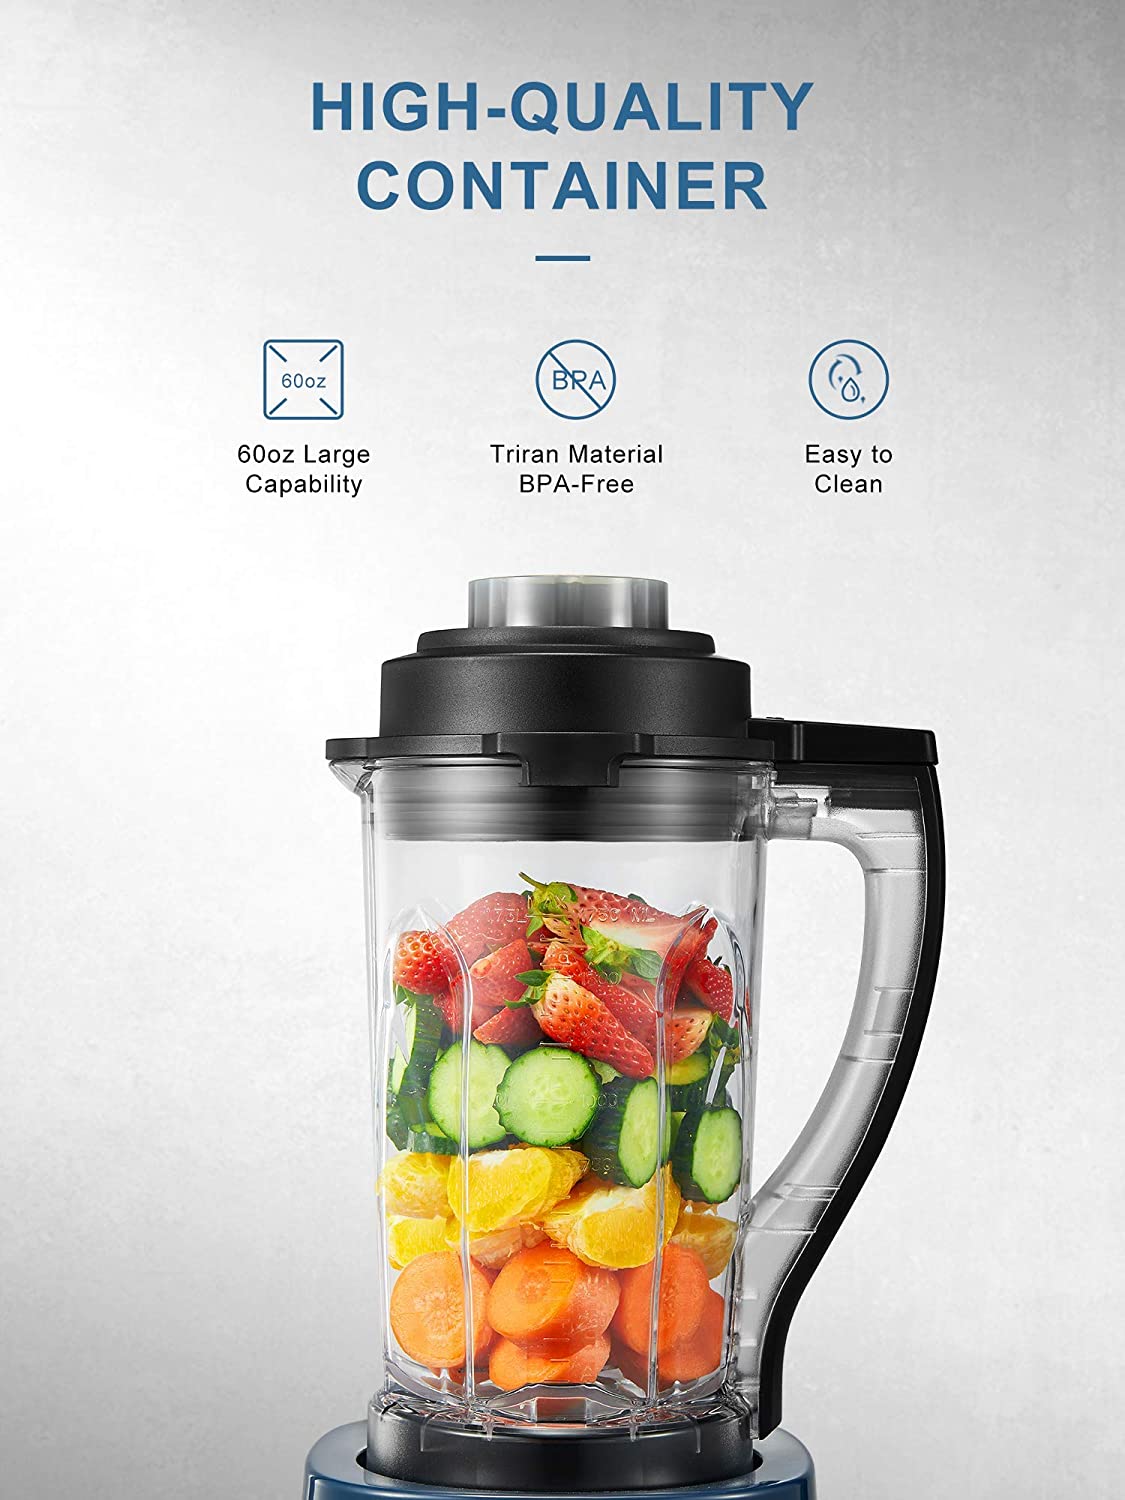 AICOOK | Smoothie Blender for Kitchen, Professional Countertop Blender for Shakes and Smoothies, 1200W Food Processor Blender with Touch Screen, 60Oz BPA-Free Pitcher for Puree, Ice Crush, Frozen Fruits, High-Quality Container